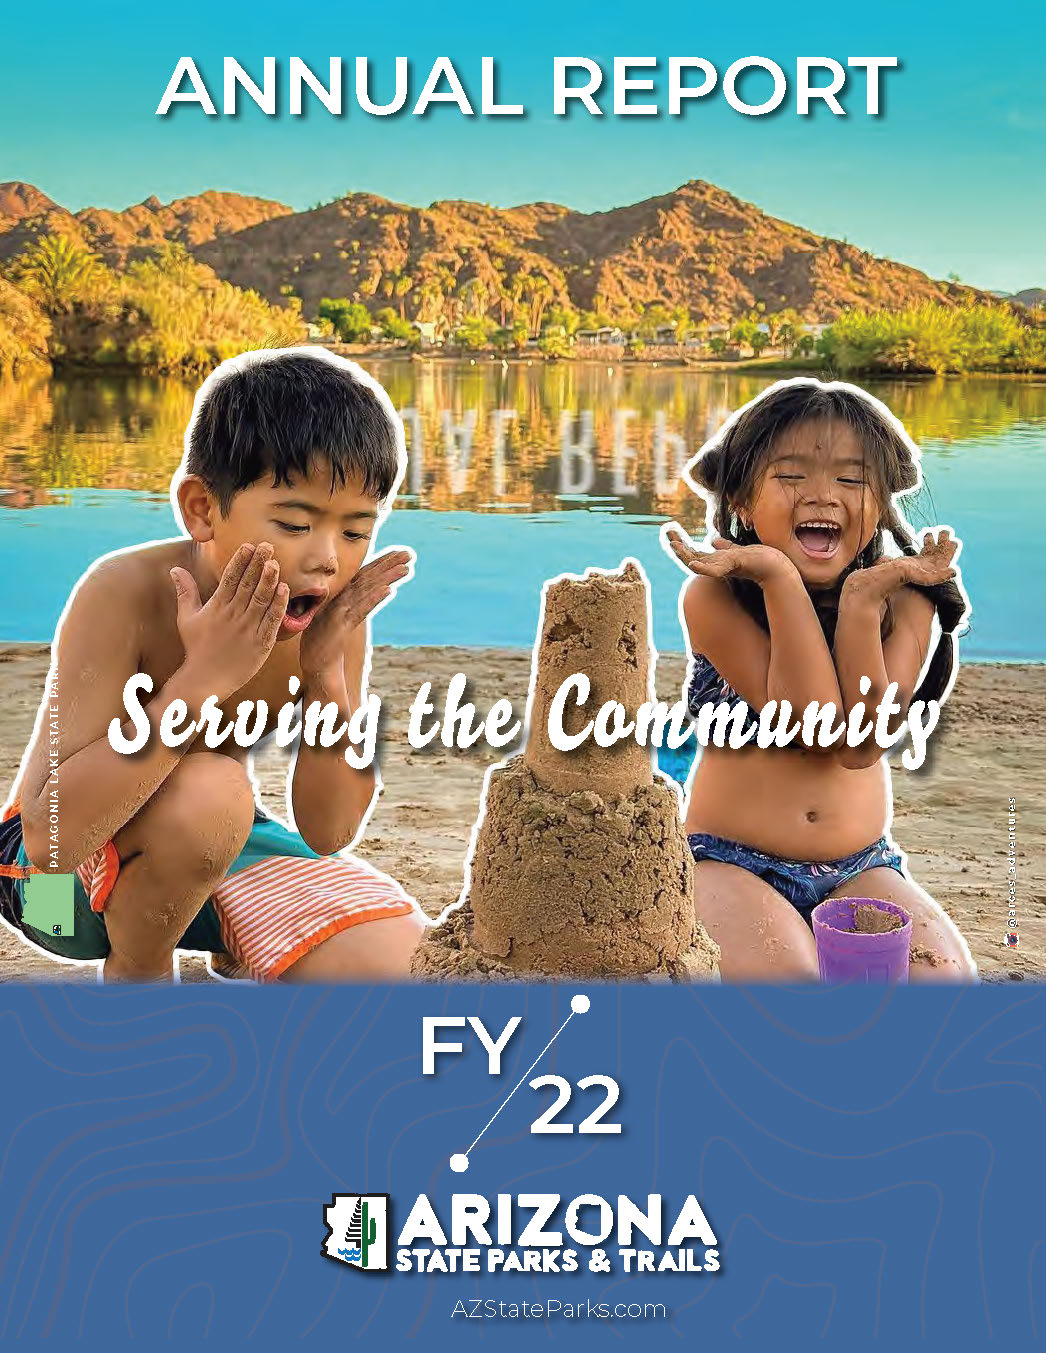 The cover of the fiscal year 2022 annual report from Arizona State Parks and Trails